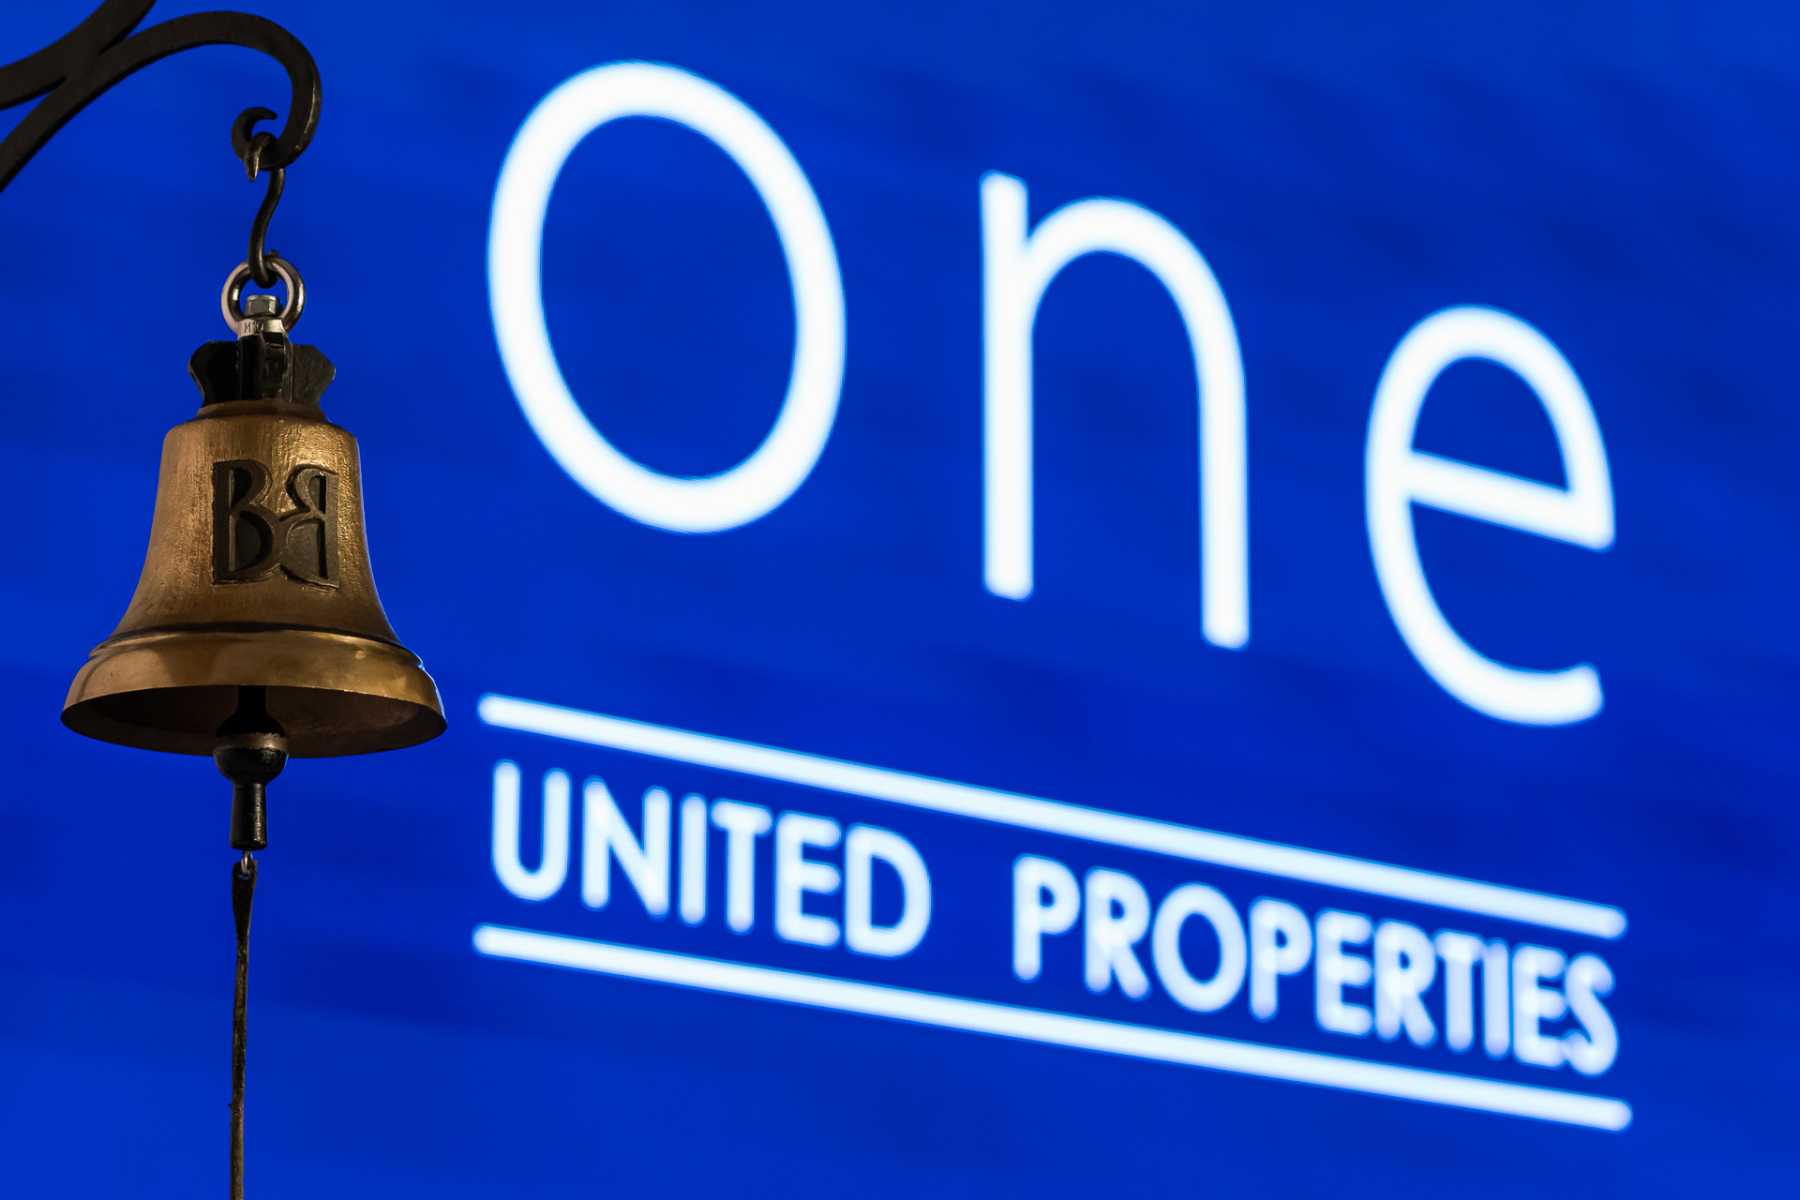 One United Properties closes the first stage of the share capital increase, raising 14.4 million euro from the existing shareholders